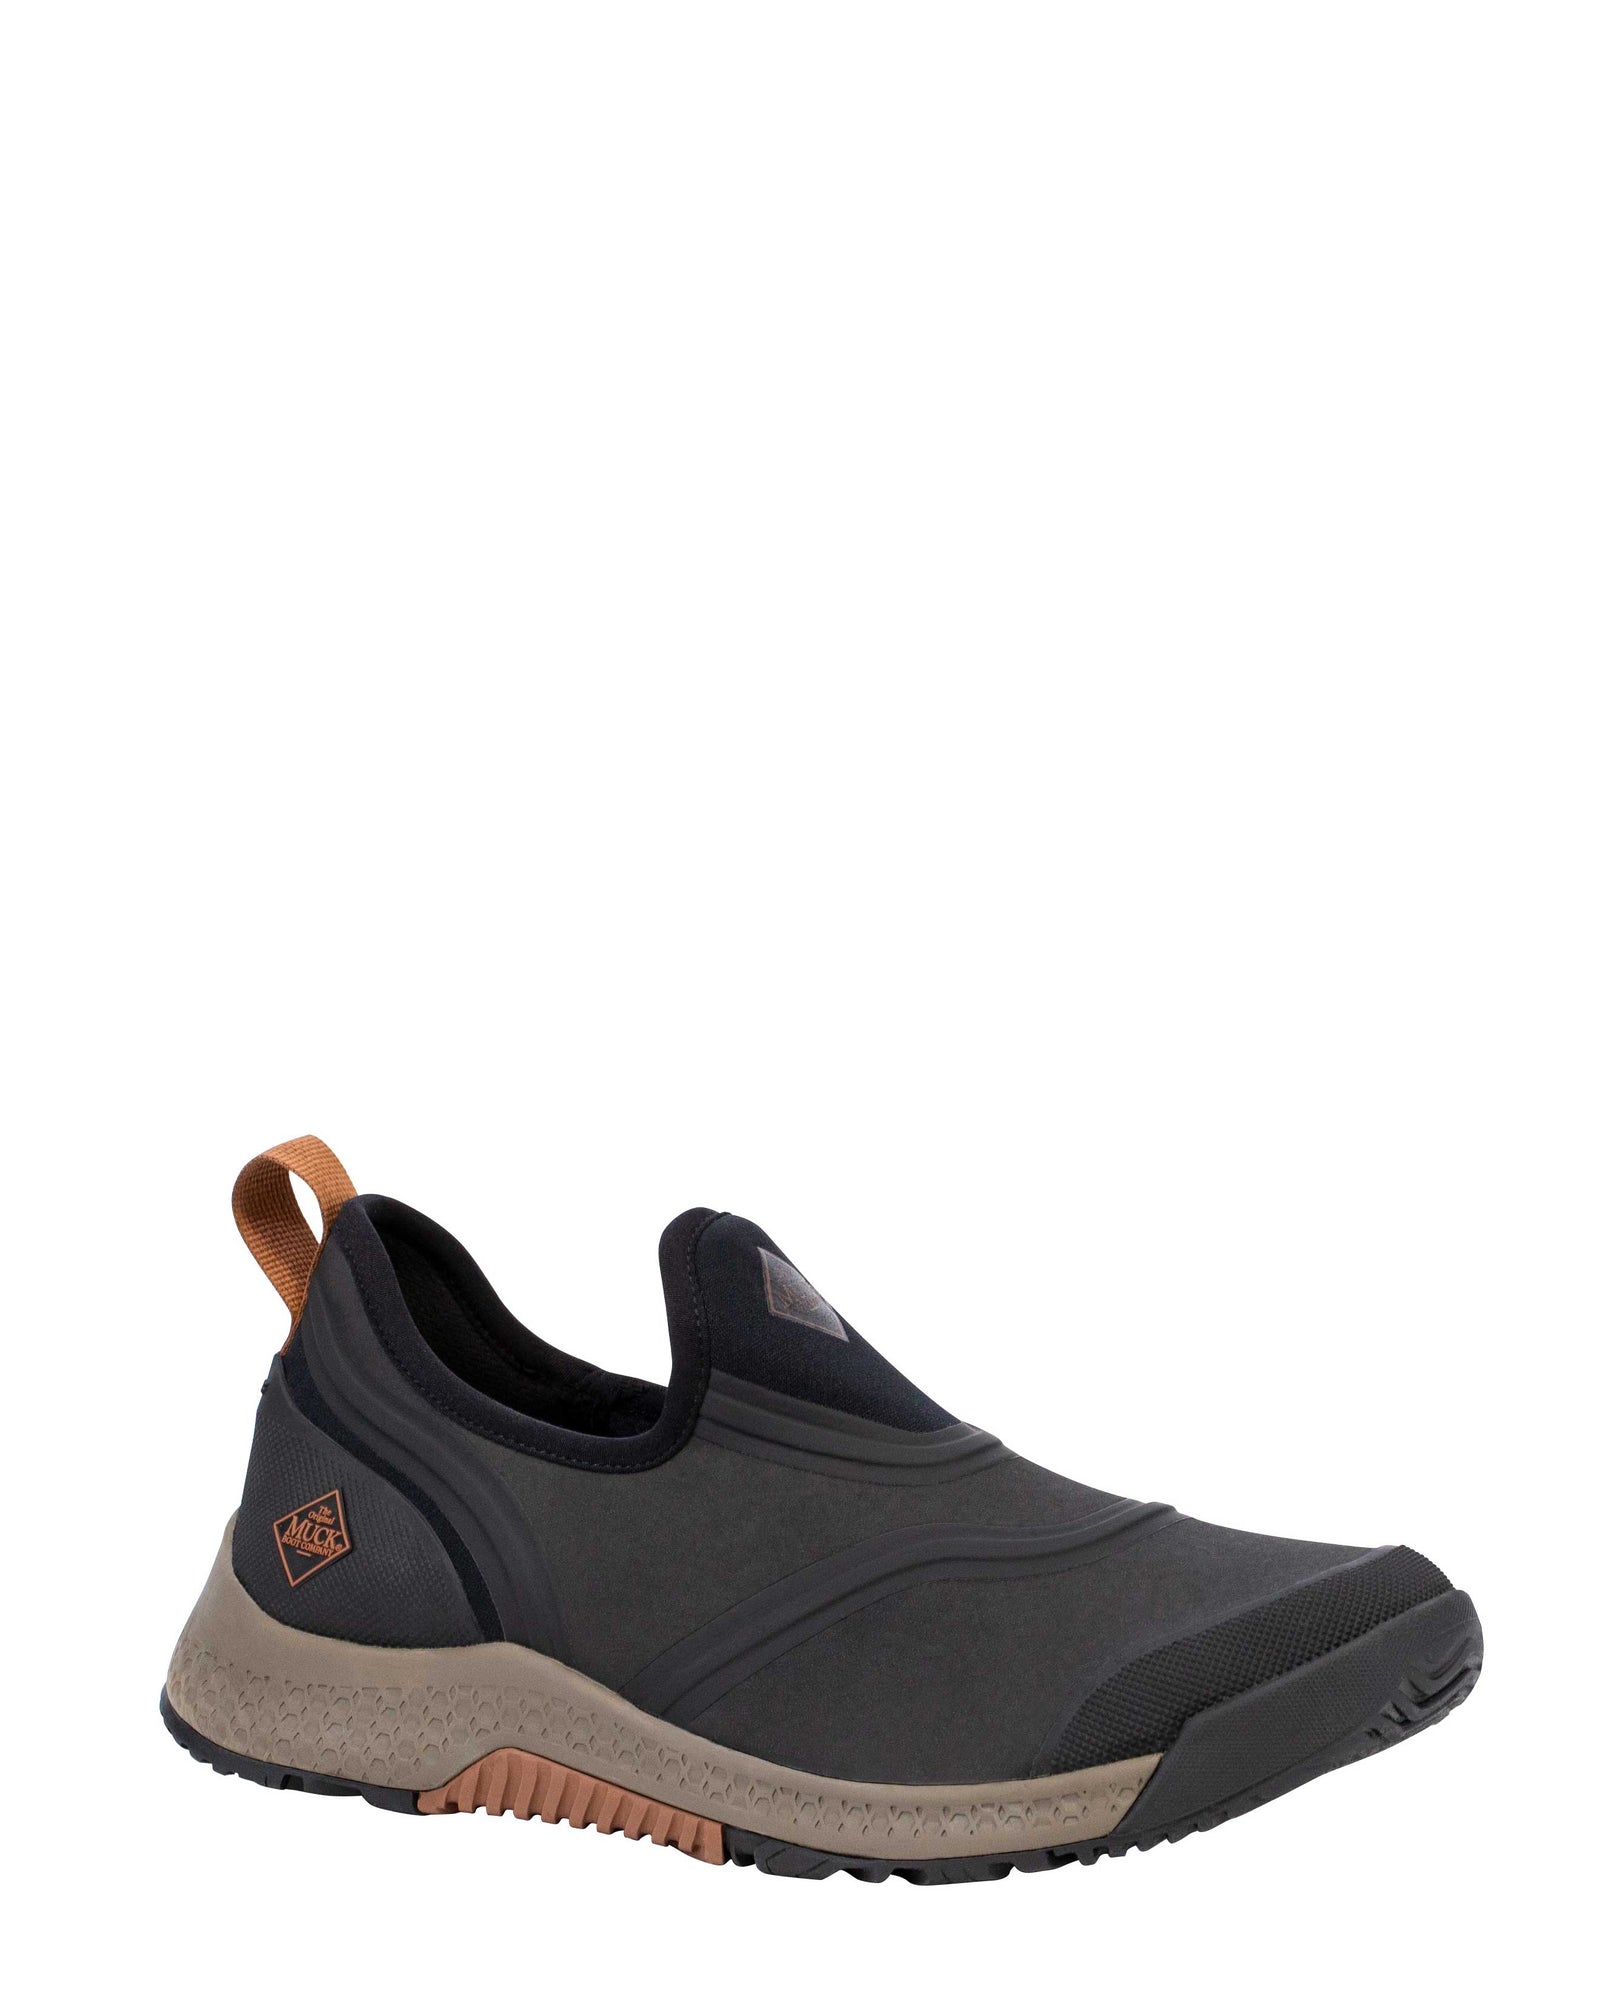 Mens Outscape Low Waterproof Shoes